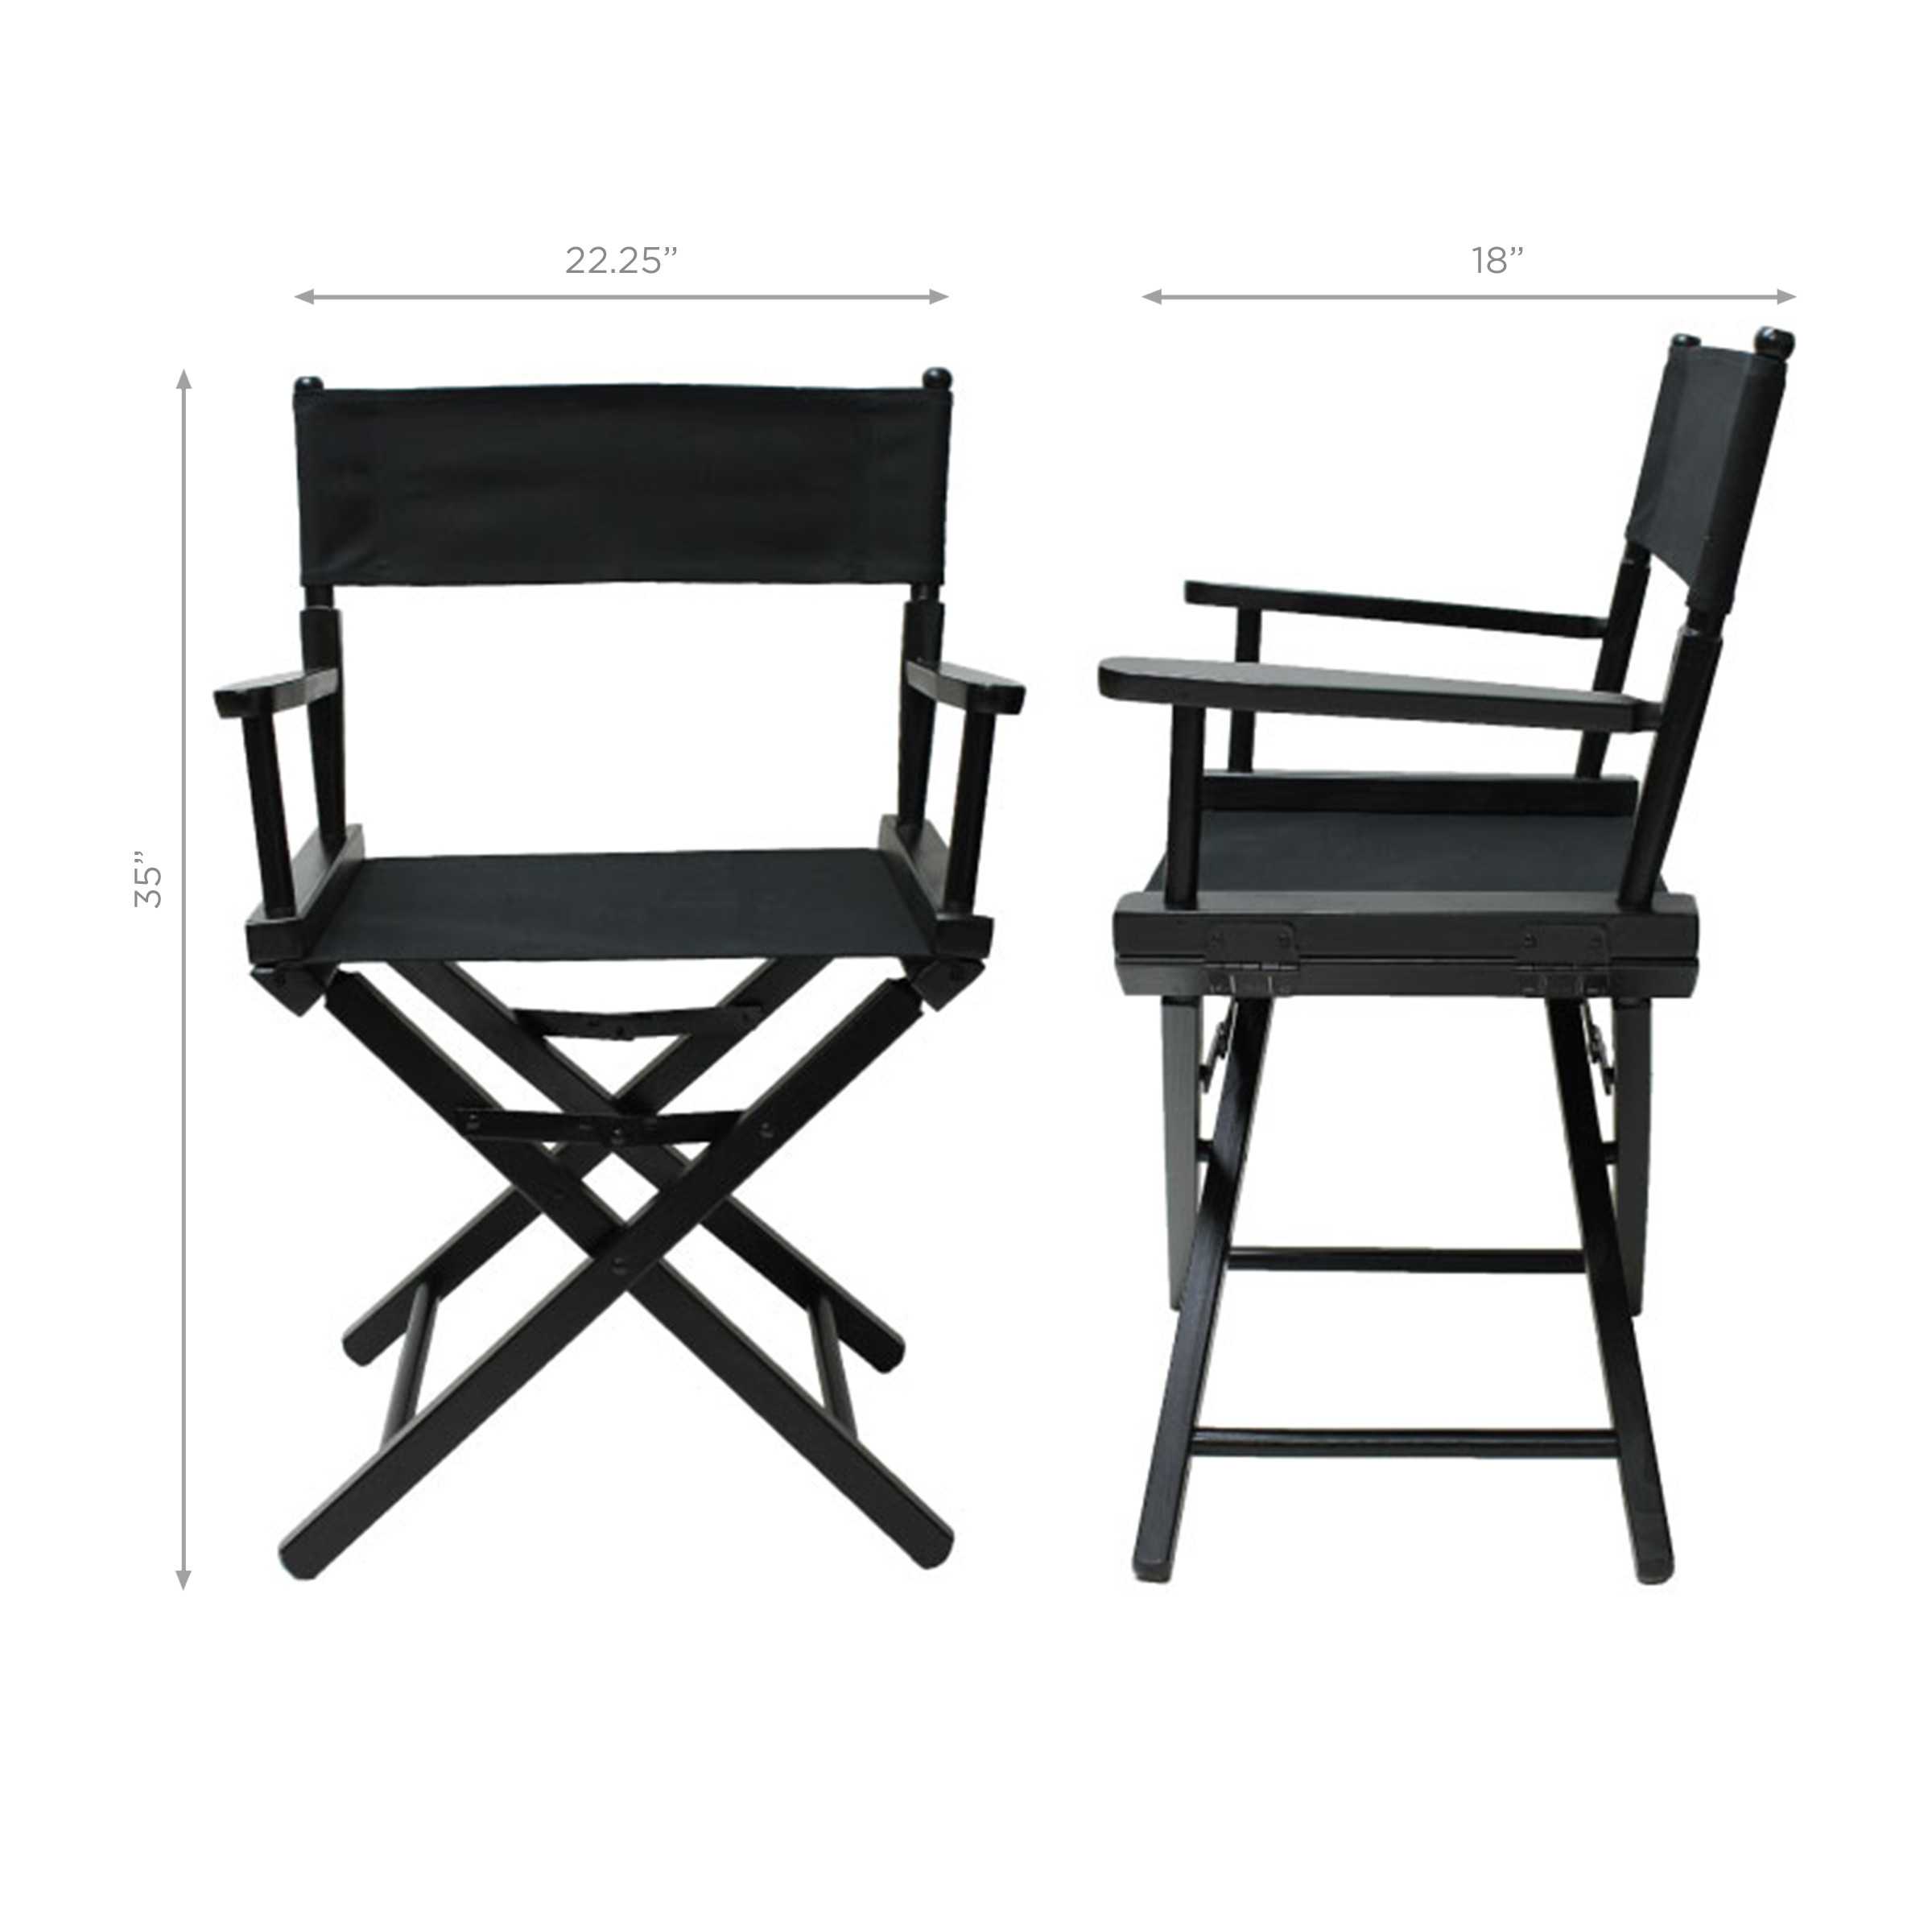 MICHIGAN STATE DIRECTORS CHAIR-TABLE HEIGHT